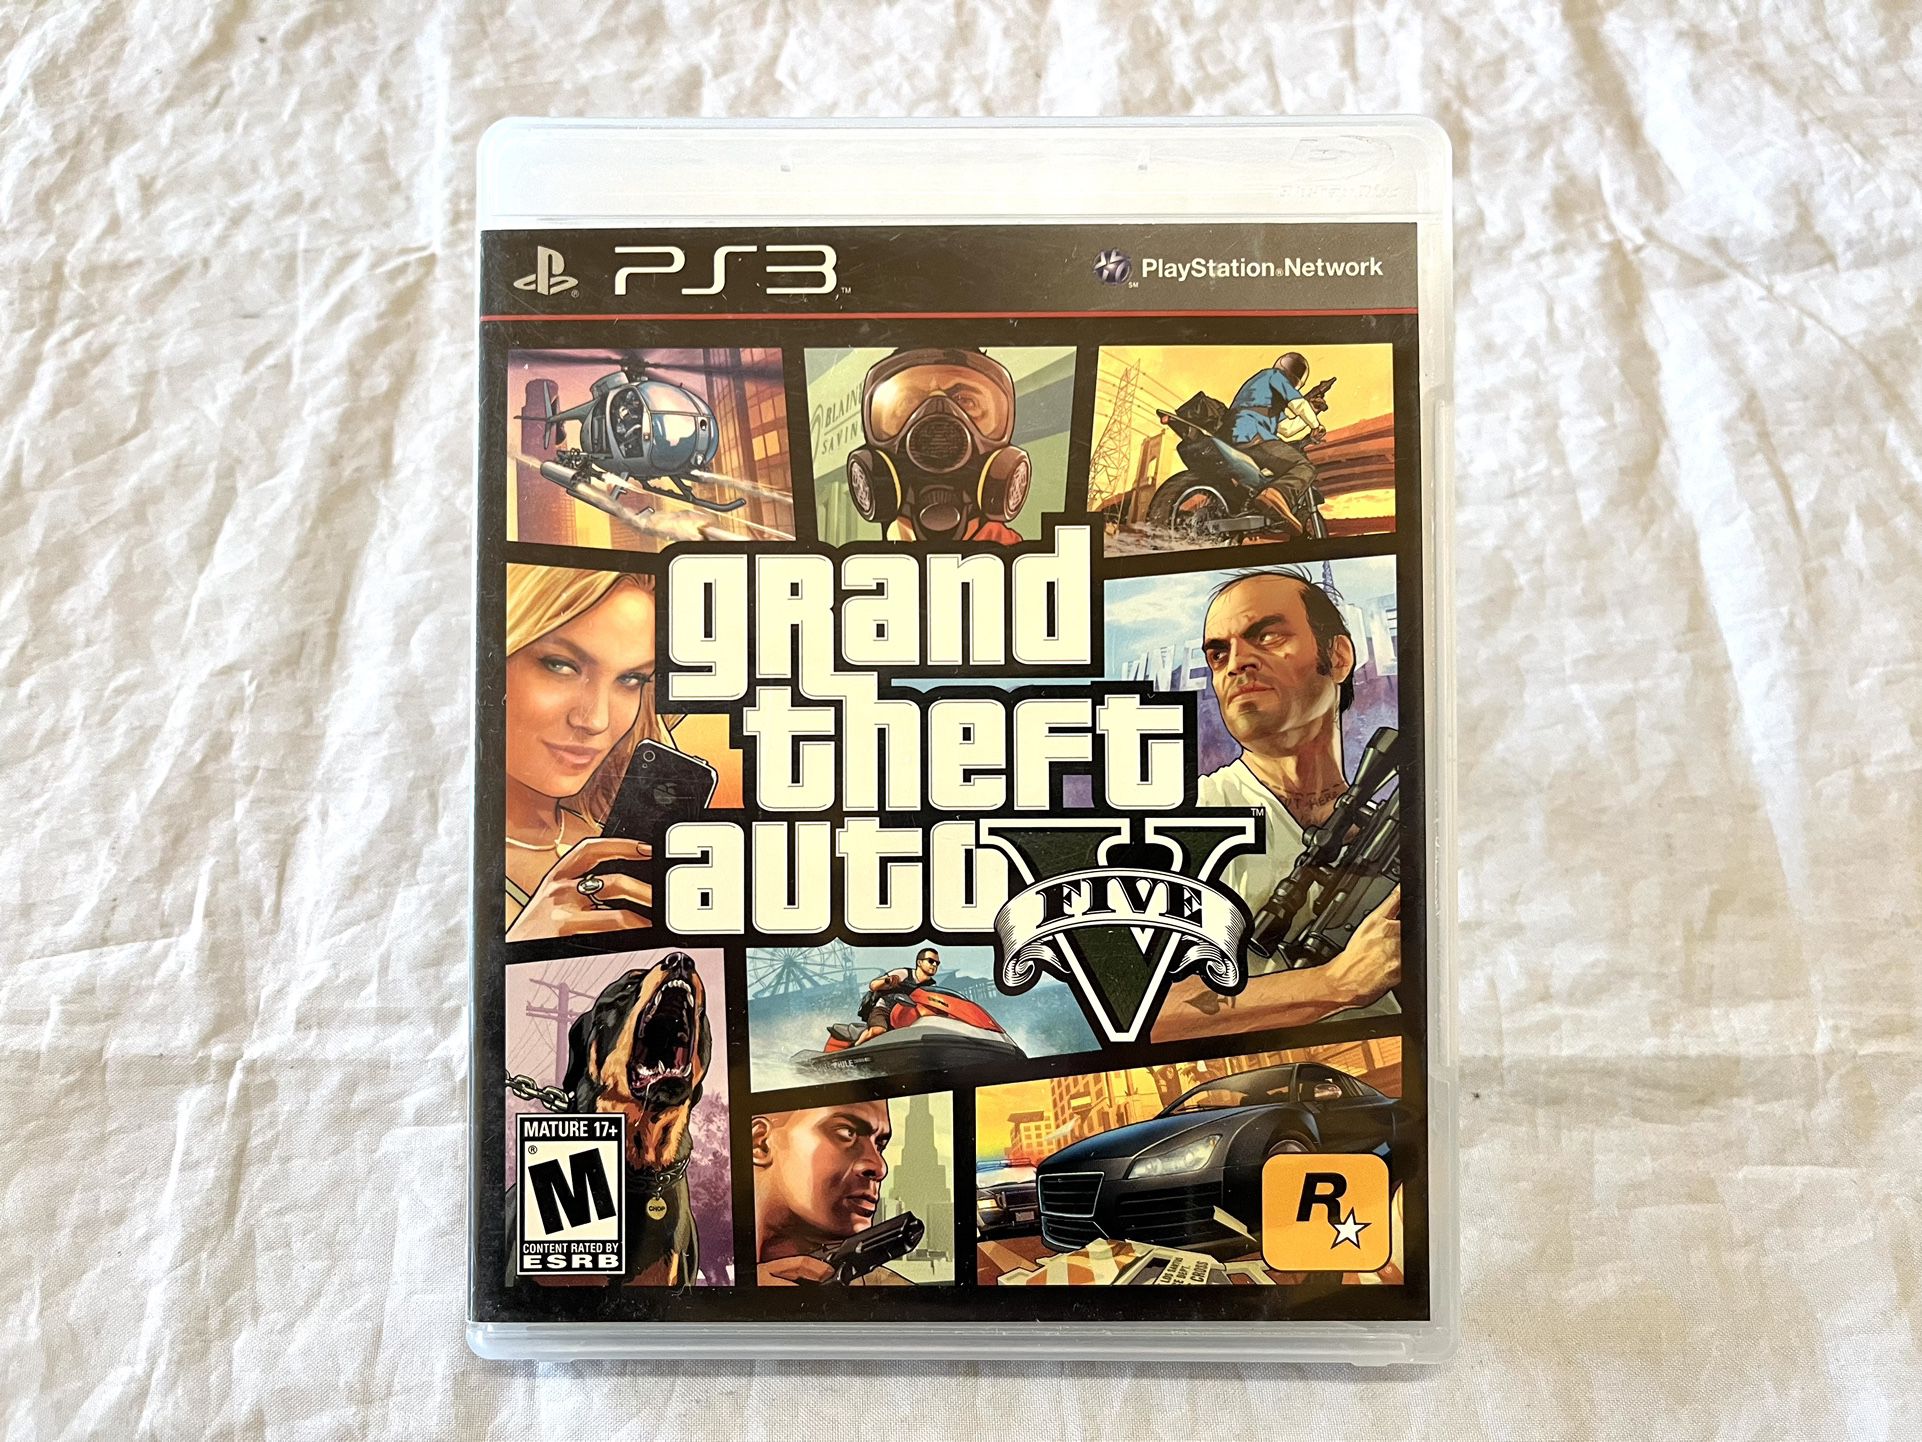 Grand Theft Auto 5 (PS3) - PRICE FIRM